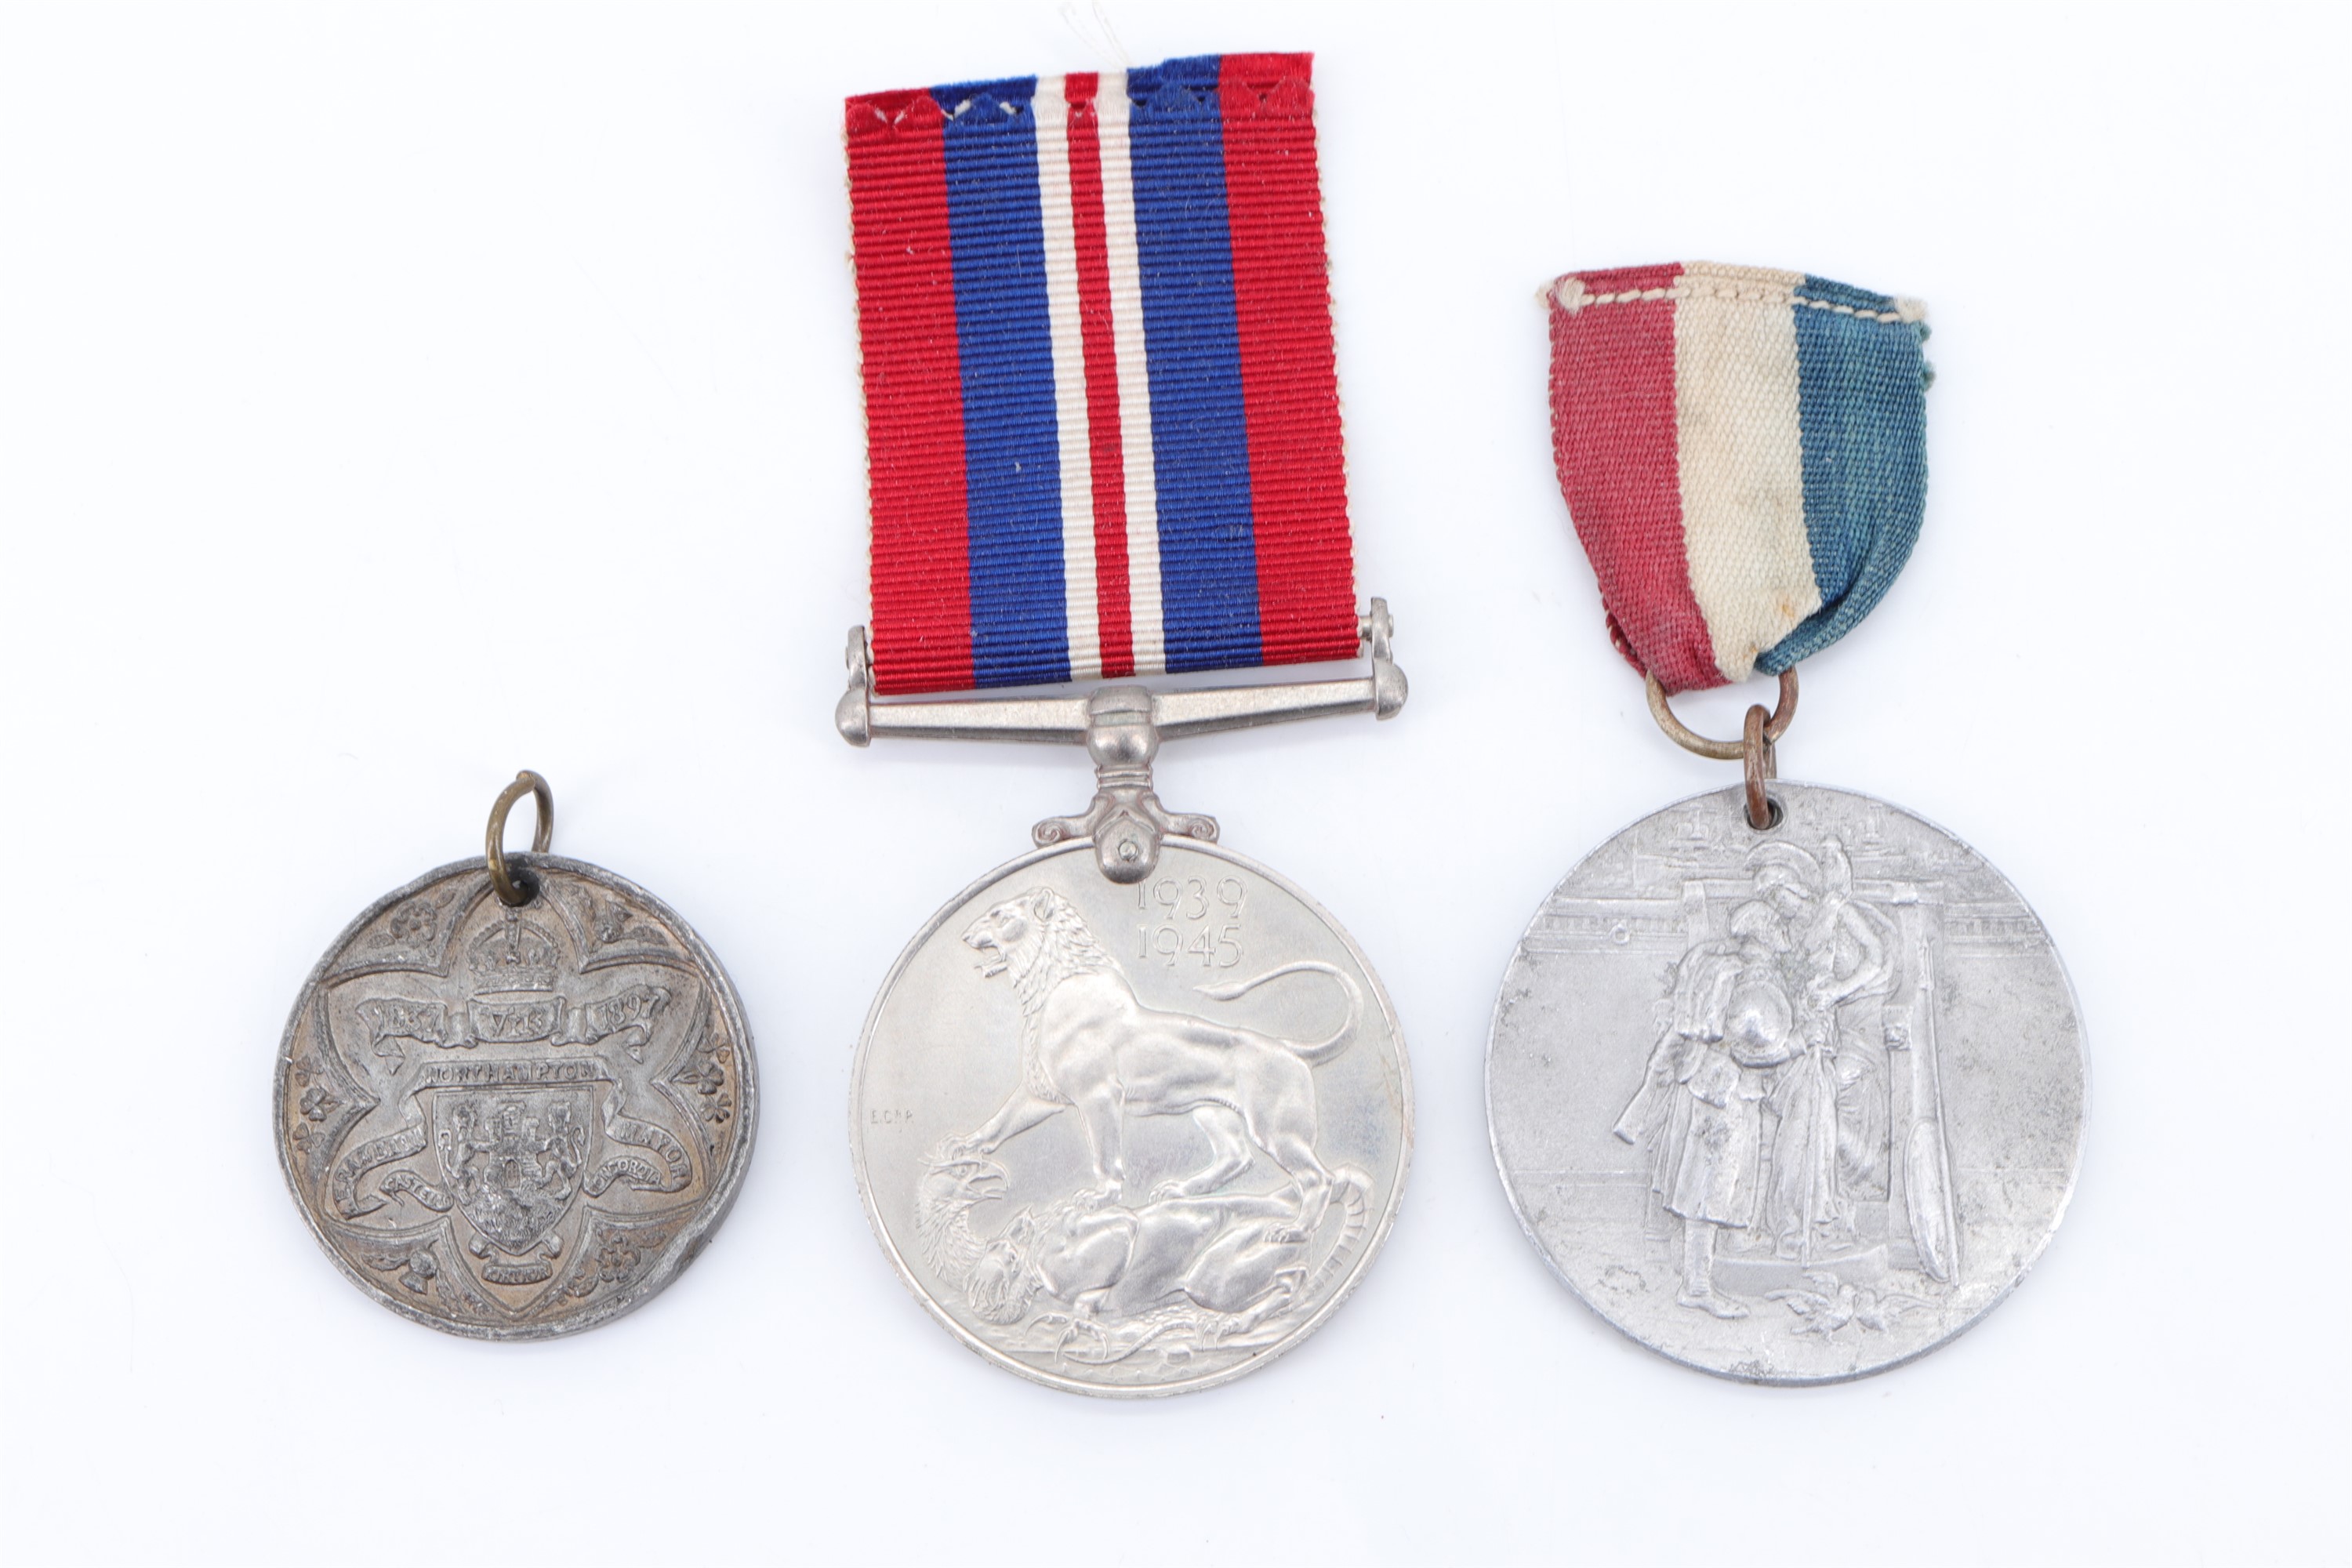 A queen Victoria diamond jubilee medallion together with a City of Carlisle 1919 peace medallion and